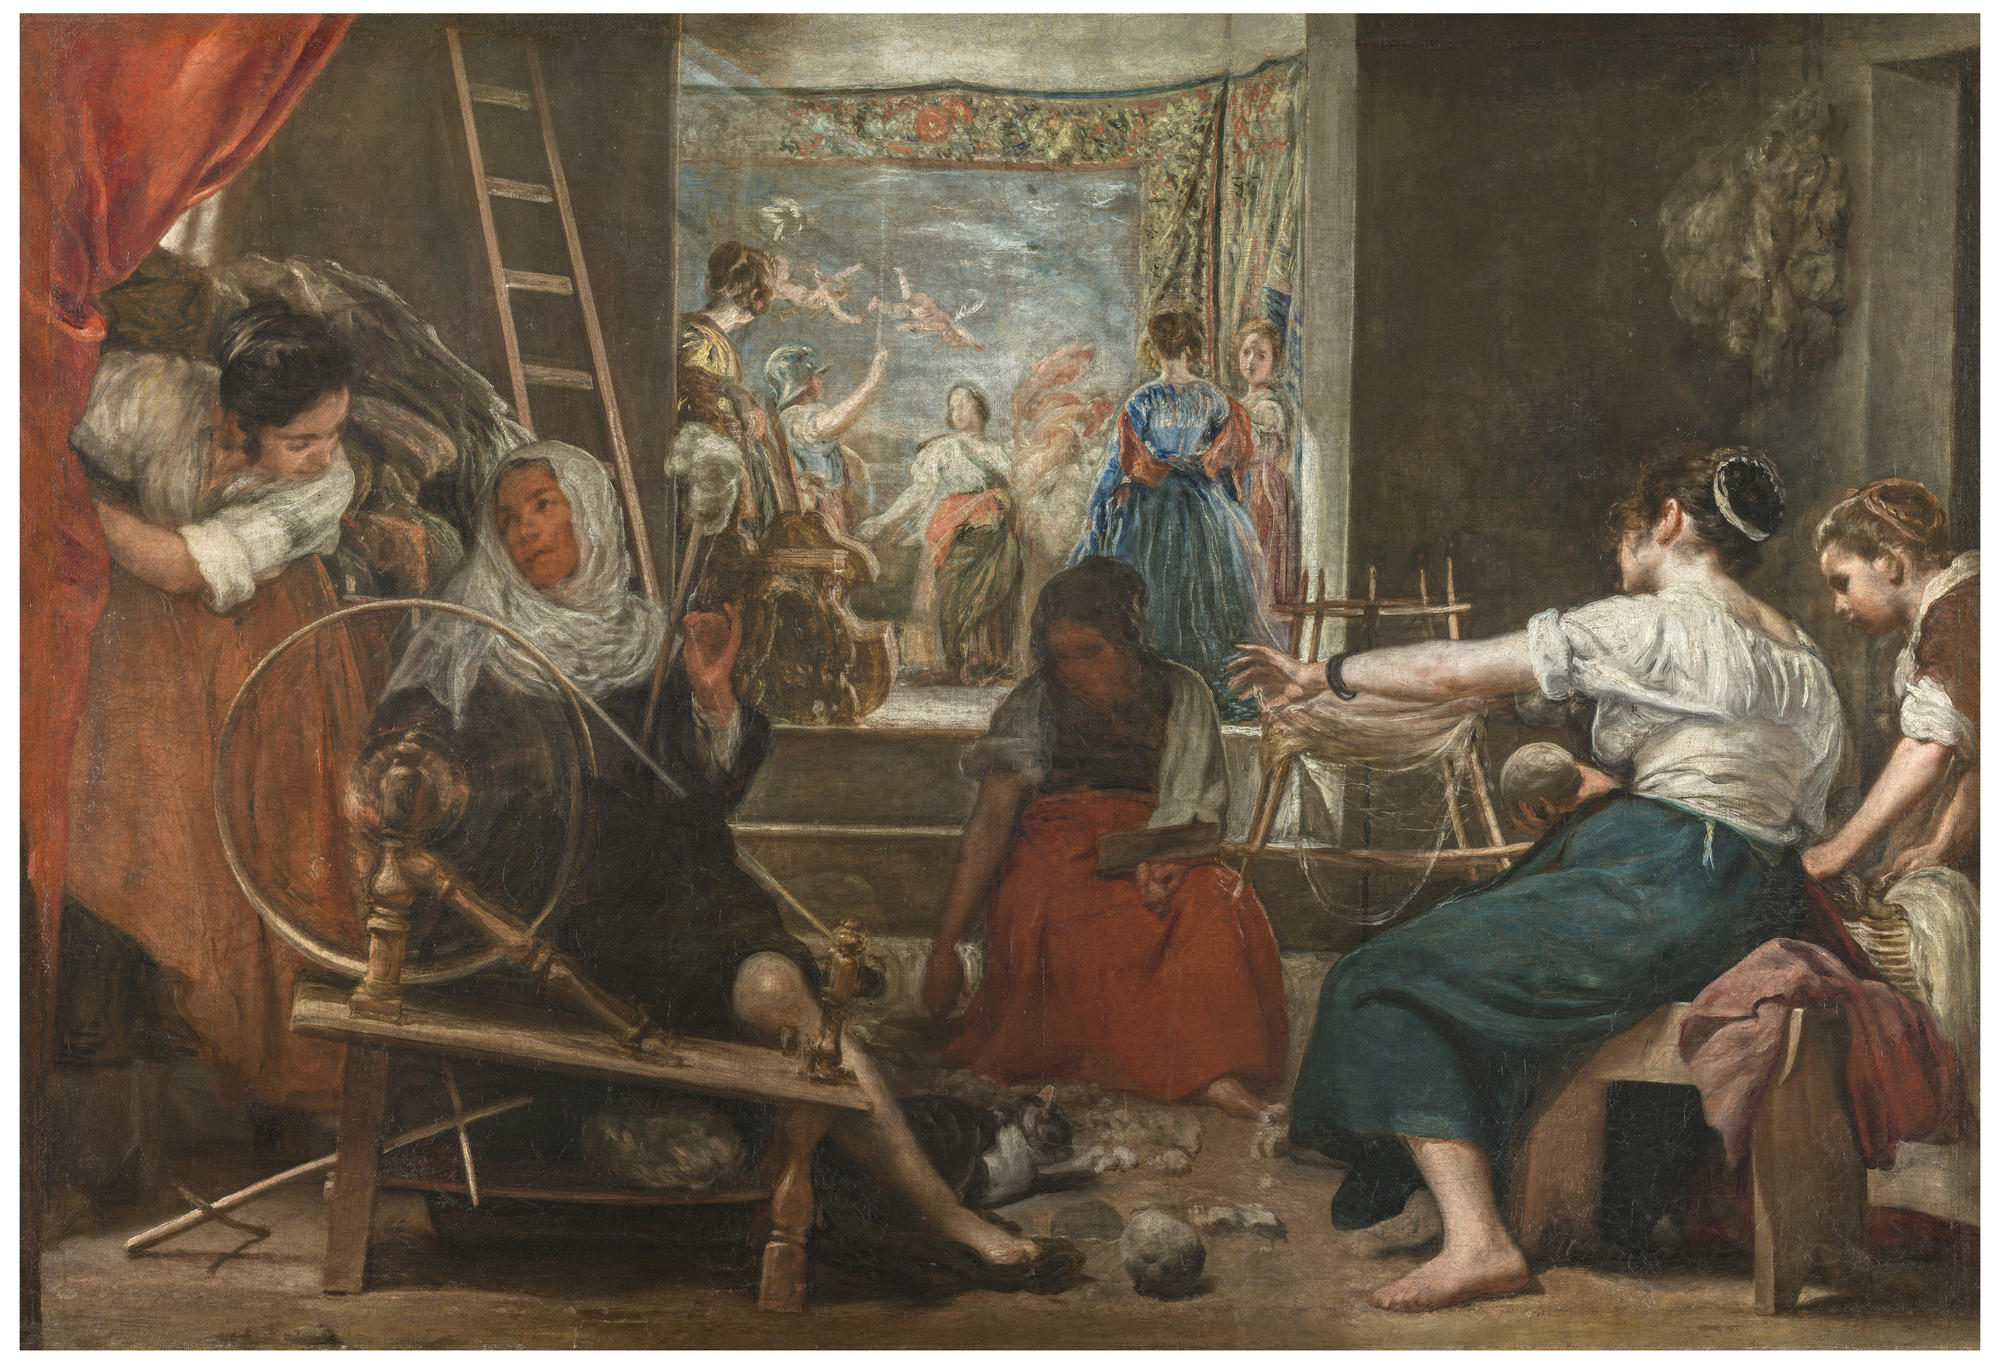 A painting of people in a room with spinning machines.